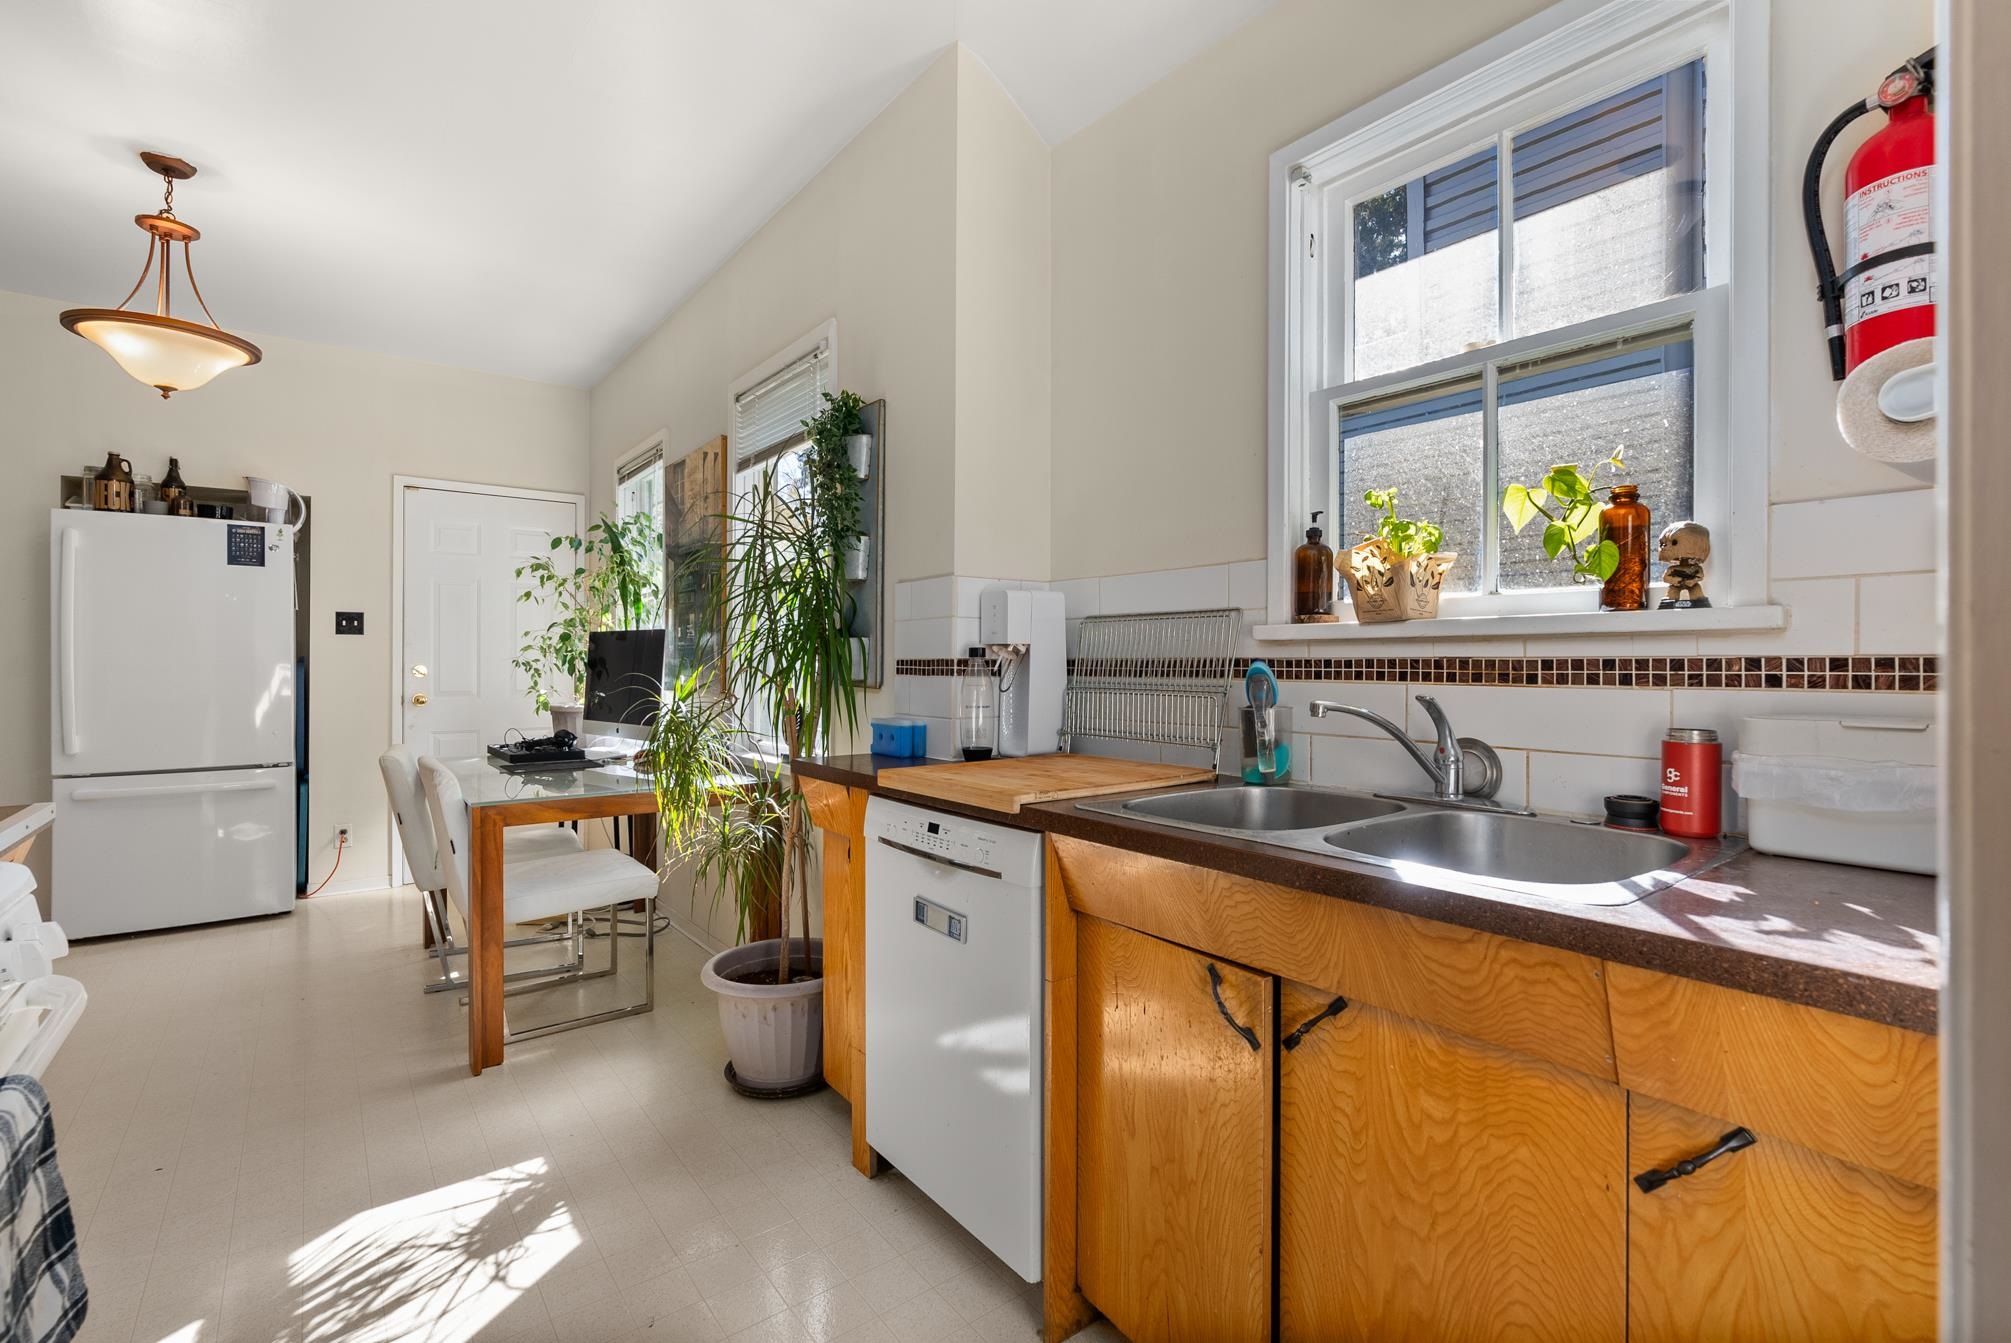 Listing image of 28 W 21ST AVENUE